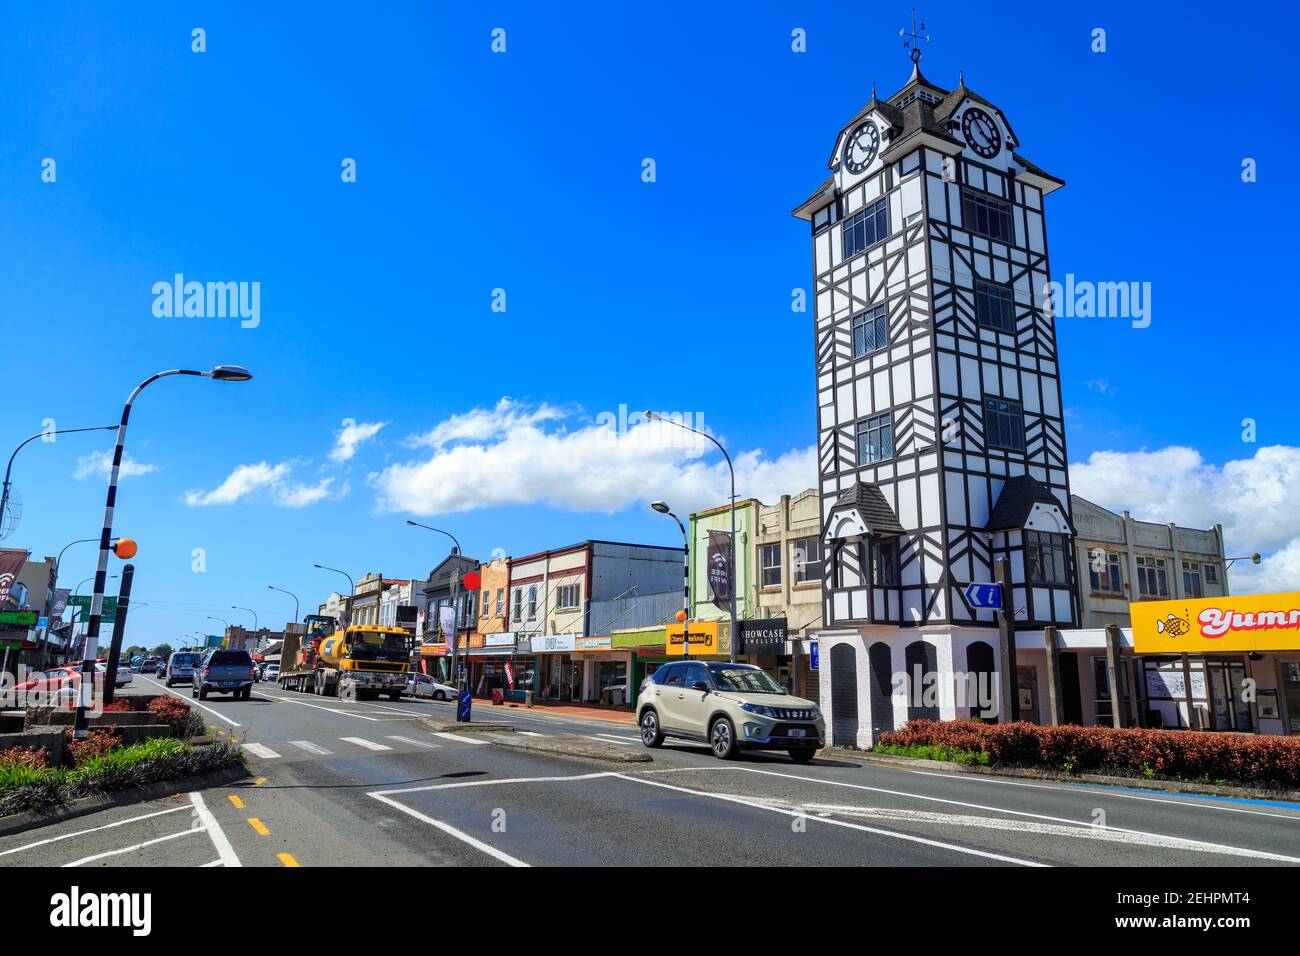 Stratford, New Zealand. To the right is an Elizabethan-style glockenspiel clock tower, one of the town's many references to Shakespeare Stock Photo